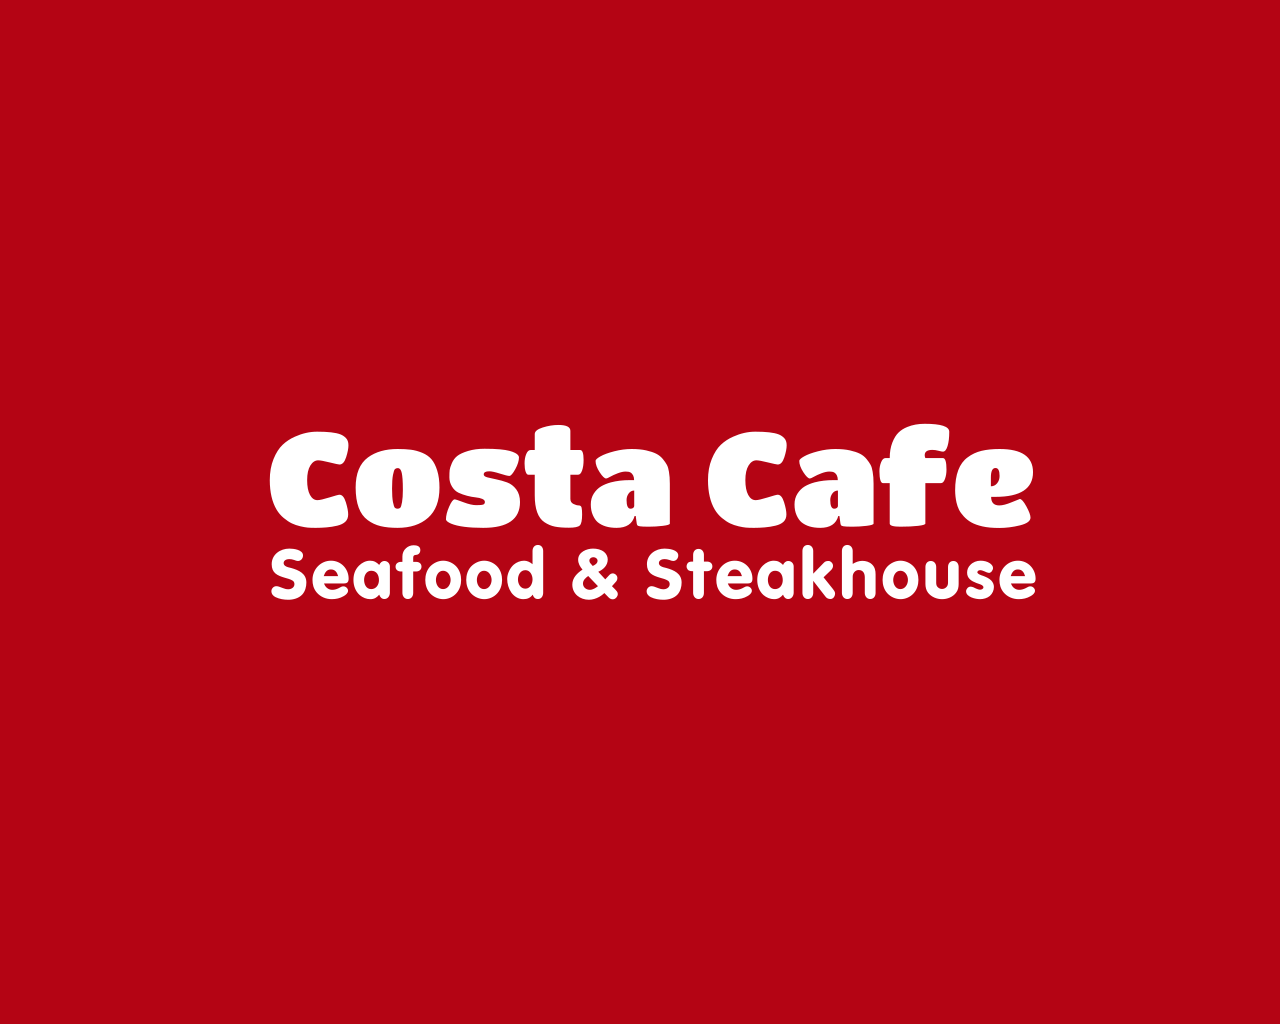 Costa Cafe Seafood & Steakhouse